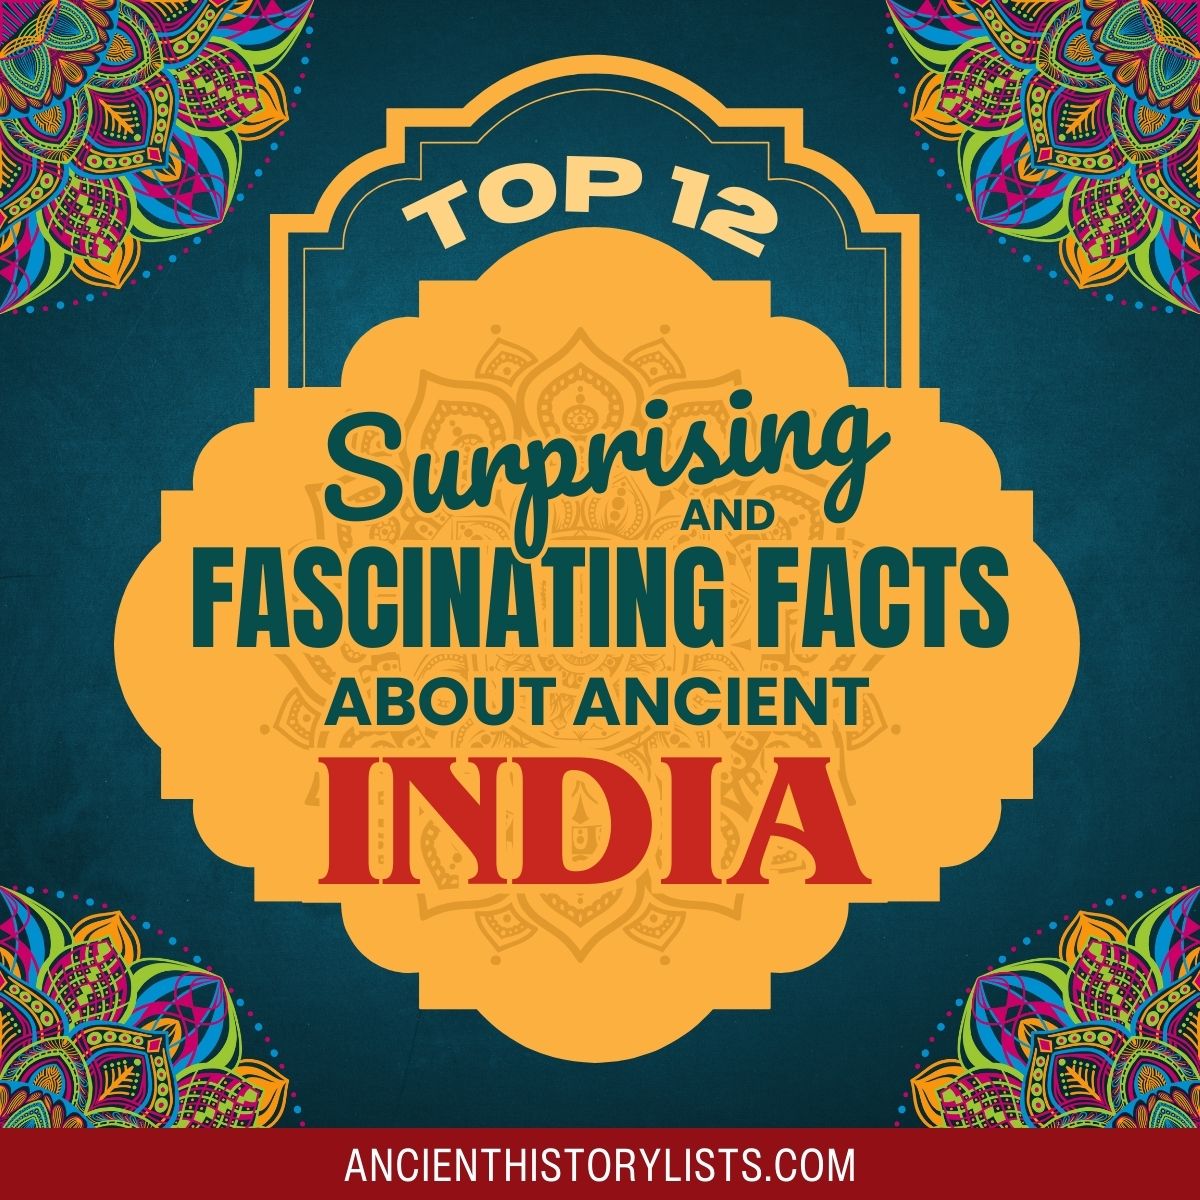 Fascinating Facts about Ancient India